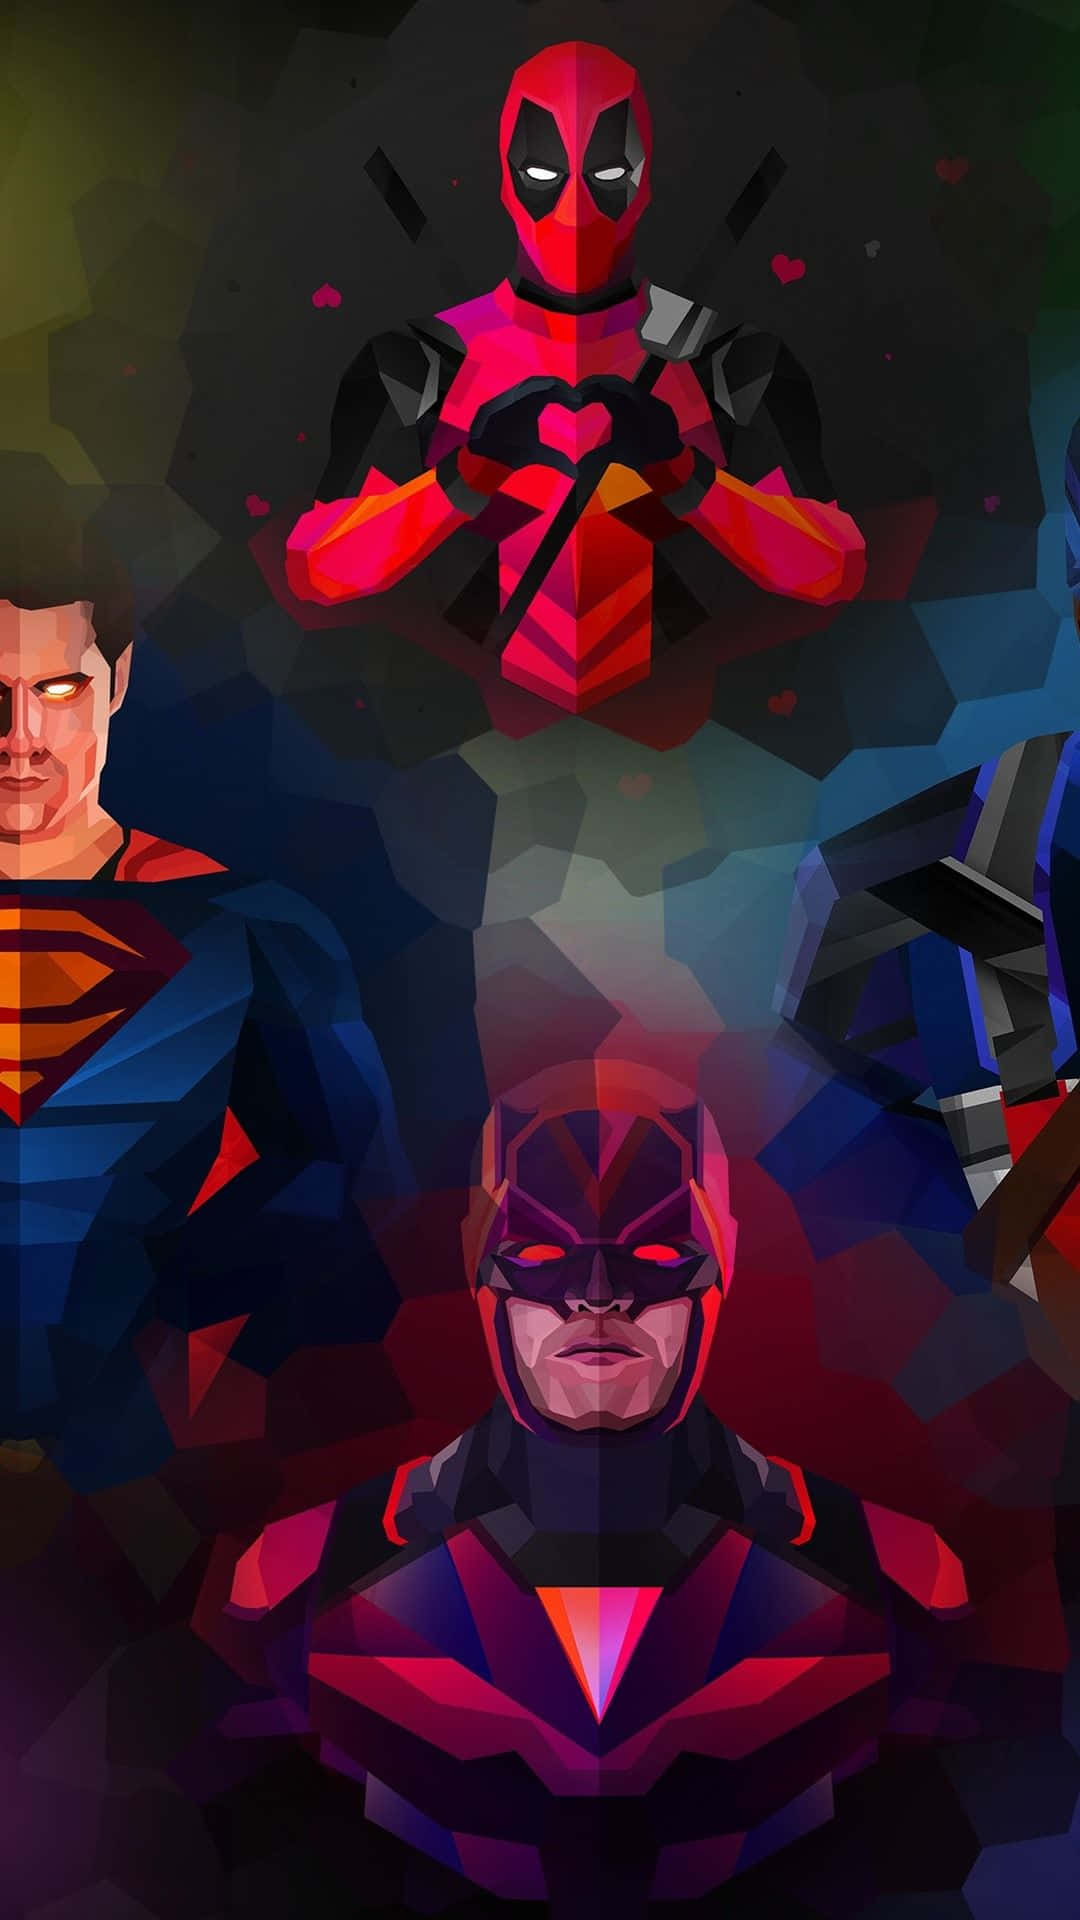 Unite the Superheroes of Marvel and DC onto your iPhone Wallpaper